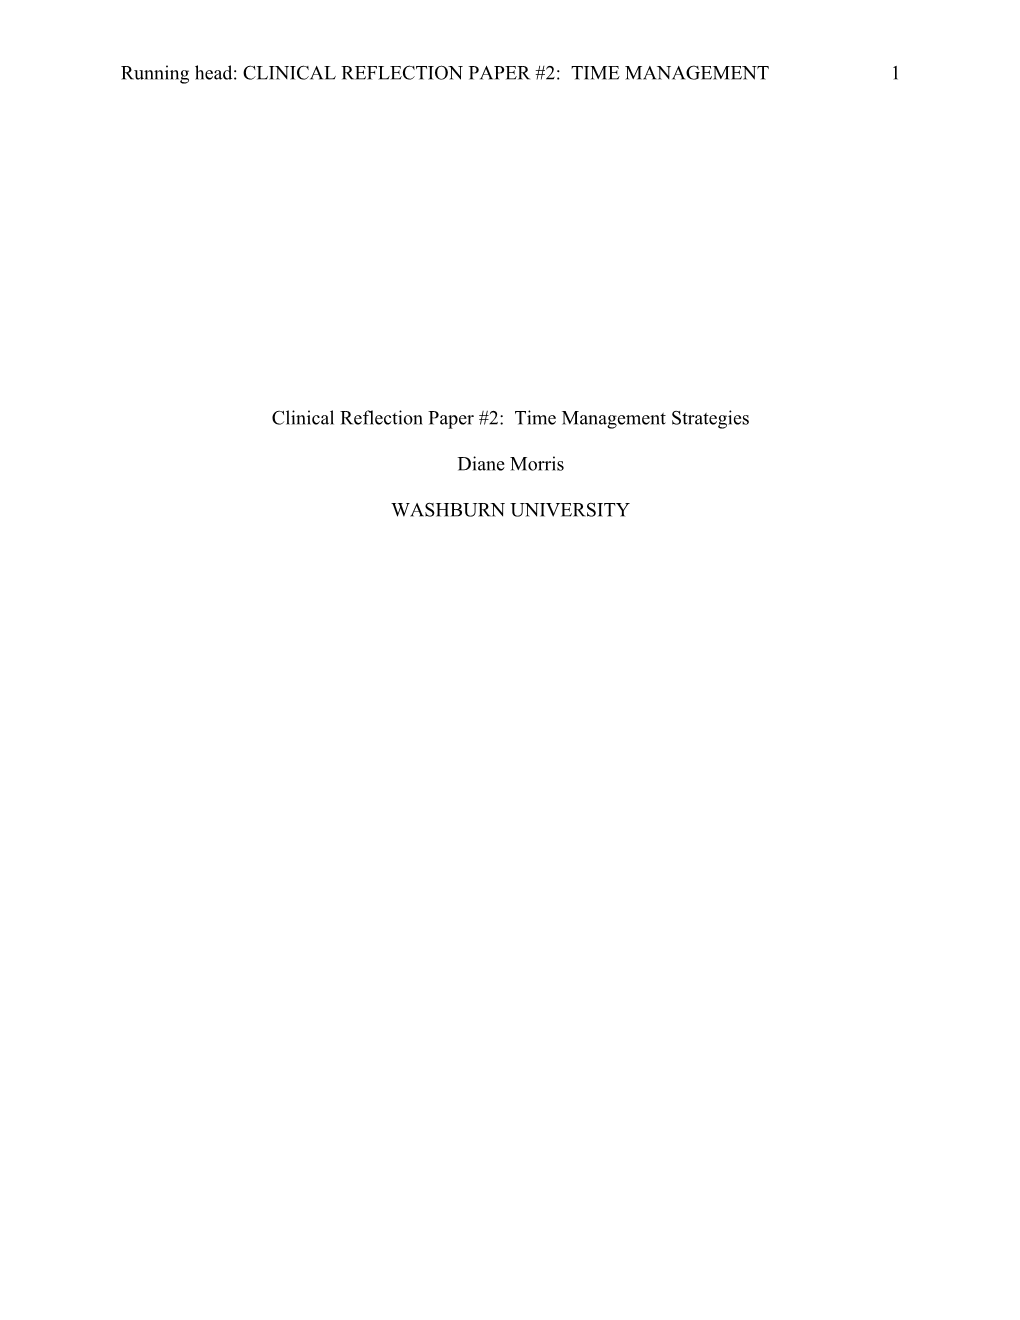 Clinical Reflection Paper #2: Time Management Strategies